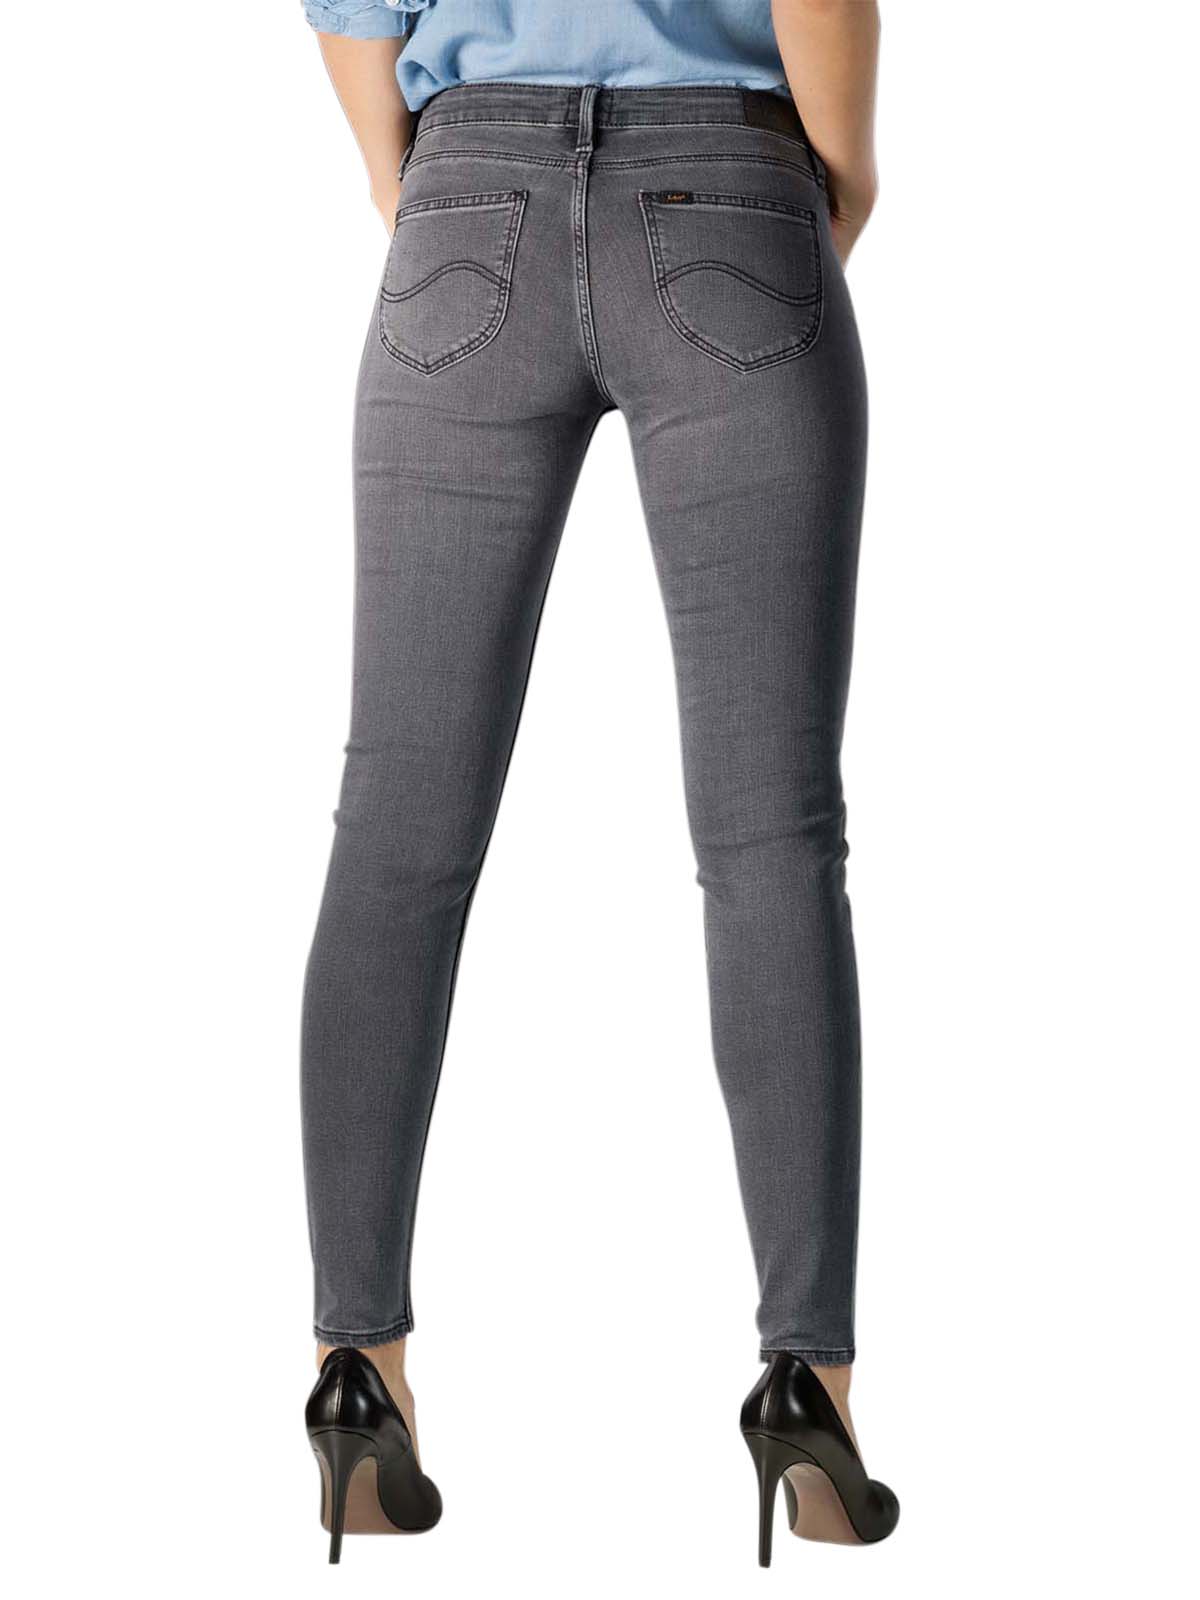 Dozens Mangle Write email Lee Scarlett Jeans Skinny Stretch raven grey Lee Women's Jeans | Free  Shipping on BEBASIC.CH - SIMPLY LOOK GOOD